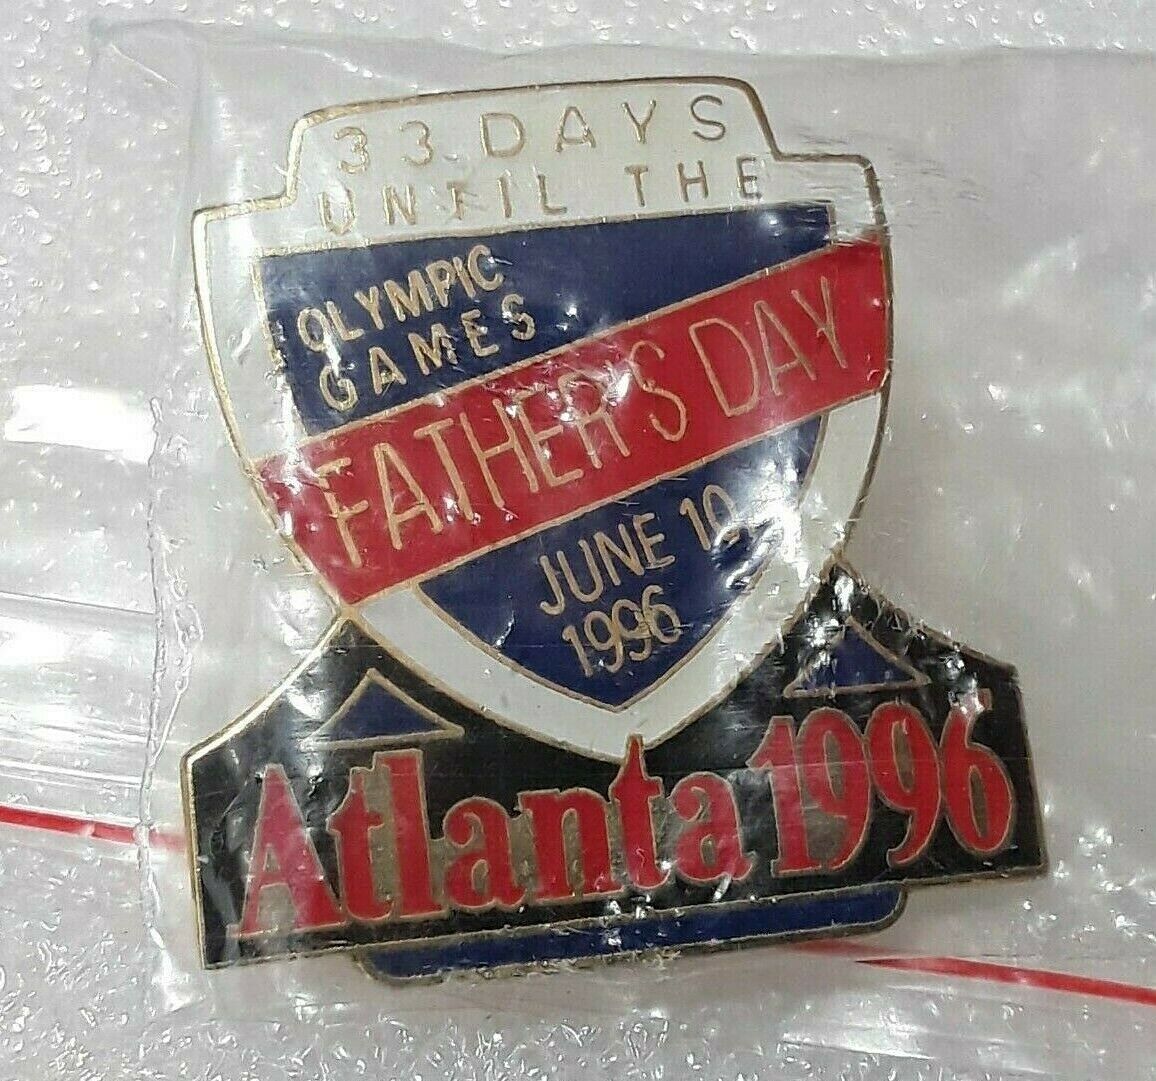 NEW 1996 ATLANTA Olympic Games Lapel Hat Pin - Happy Father's Day 33 Days Until